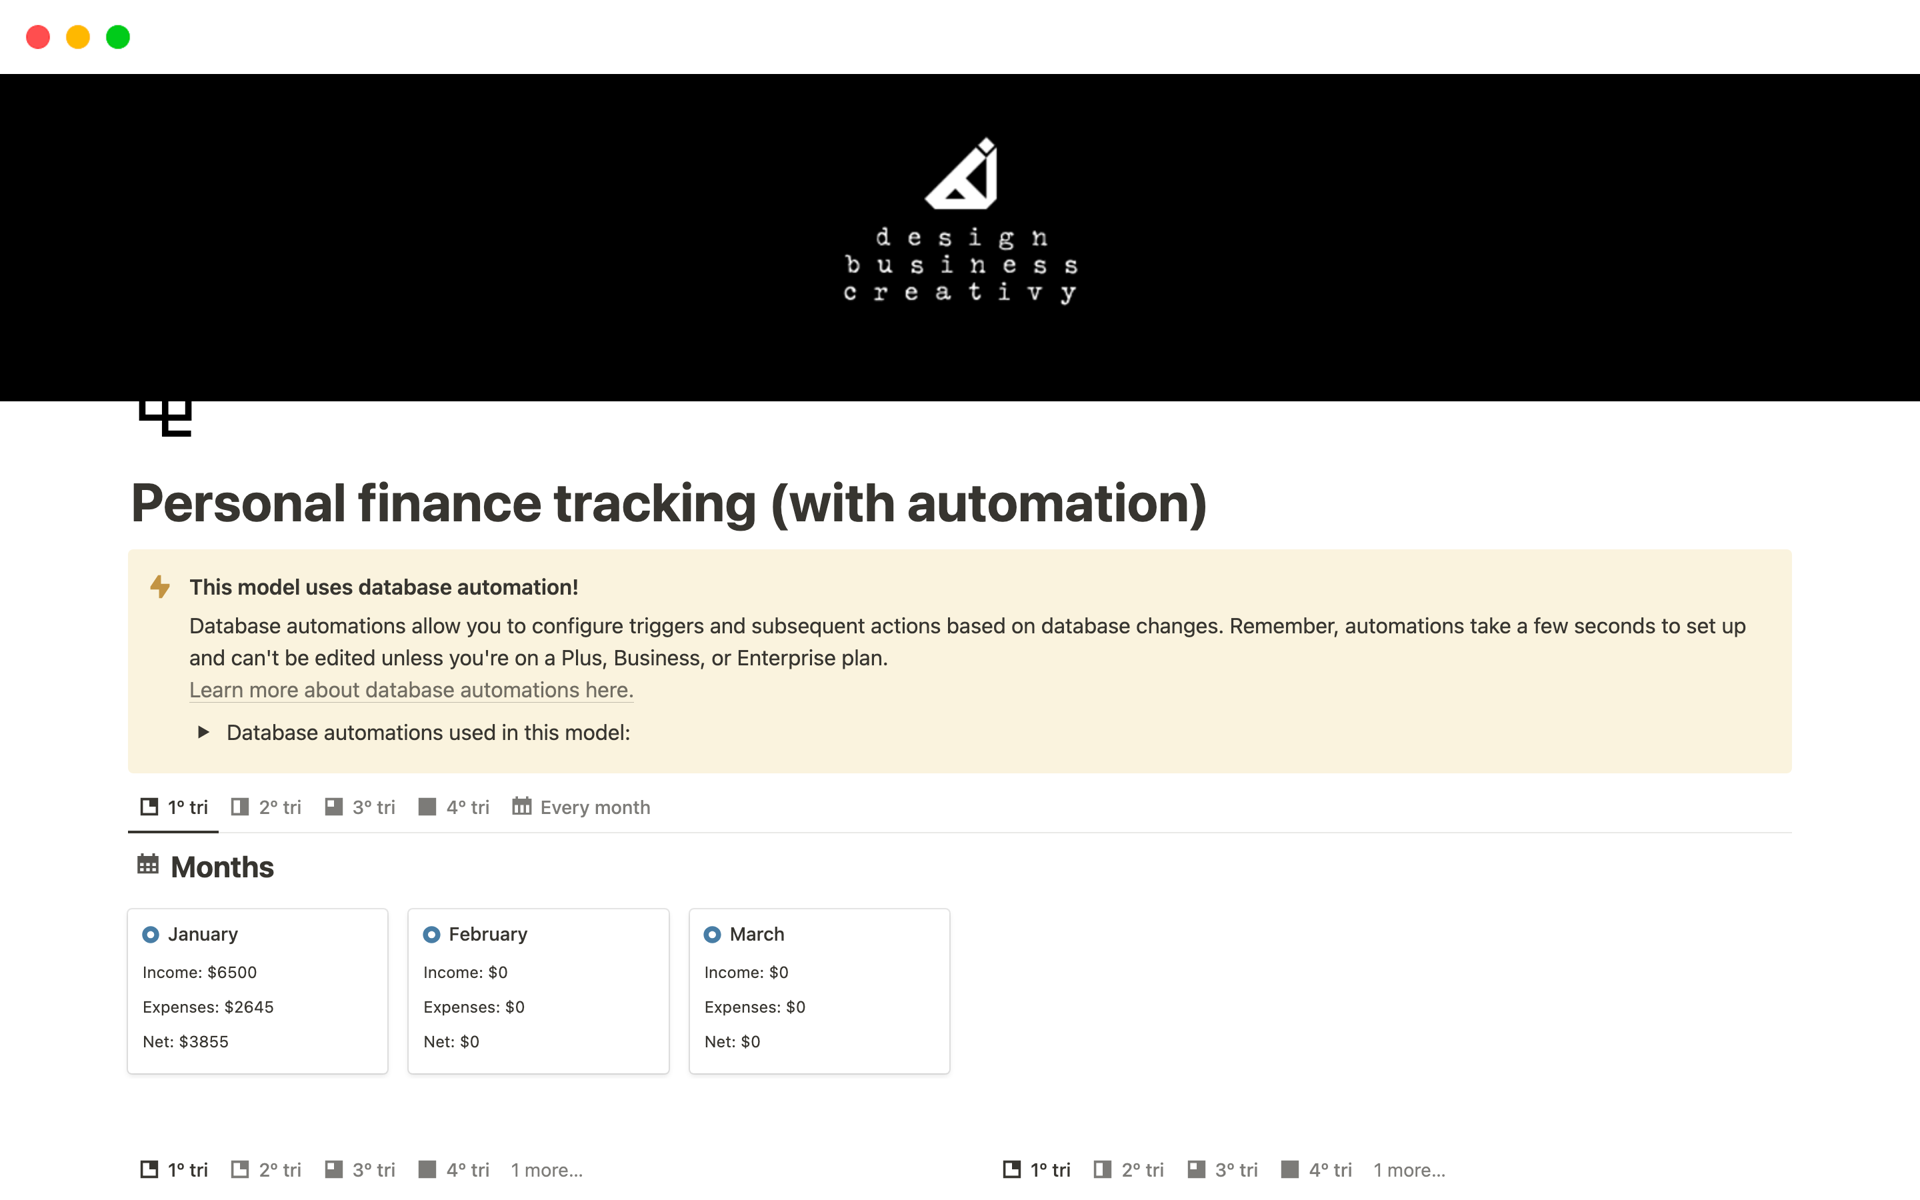 Our Personal Finance Tracking template epitomizes financial empowerment with automated efficiency, reflecting our brand's core values of transparency and accuracy.